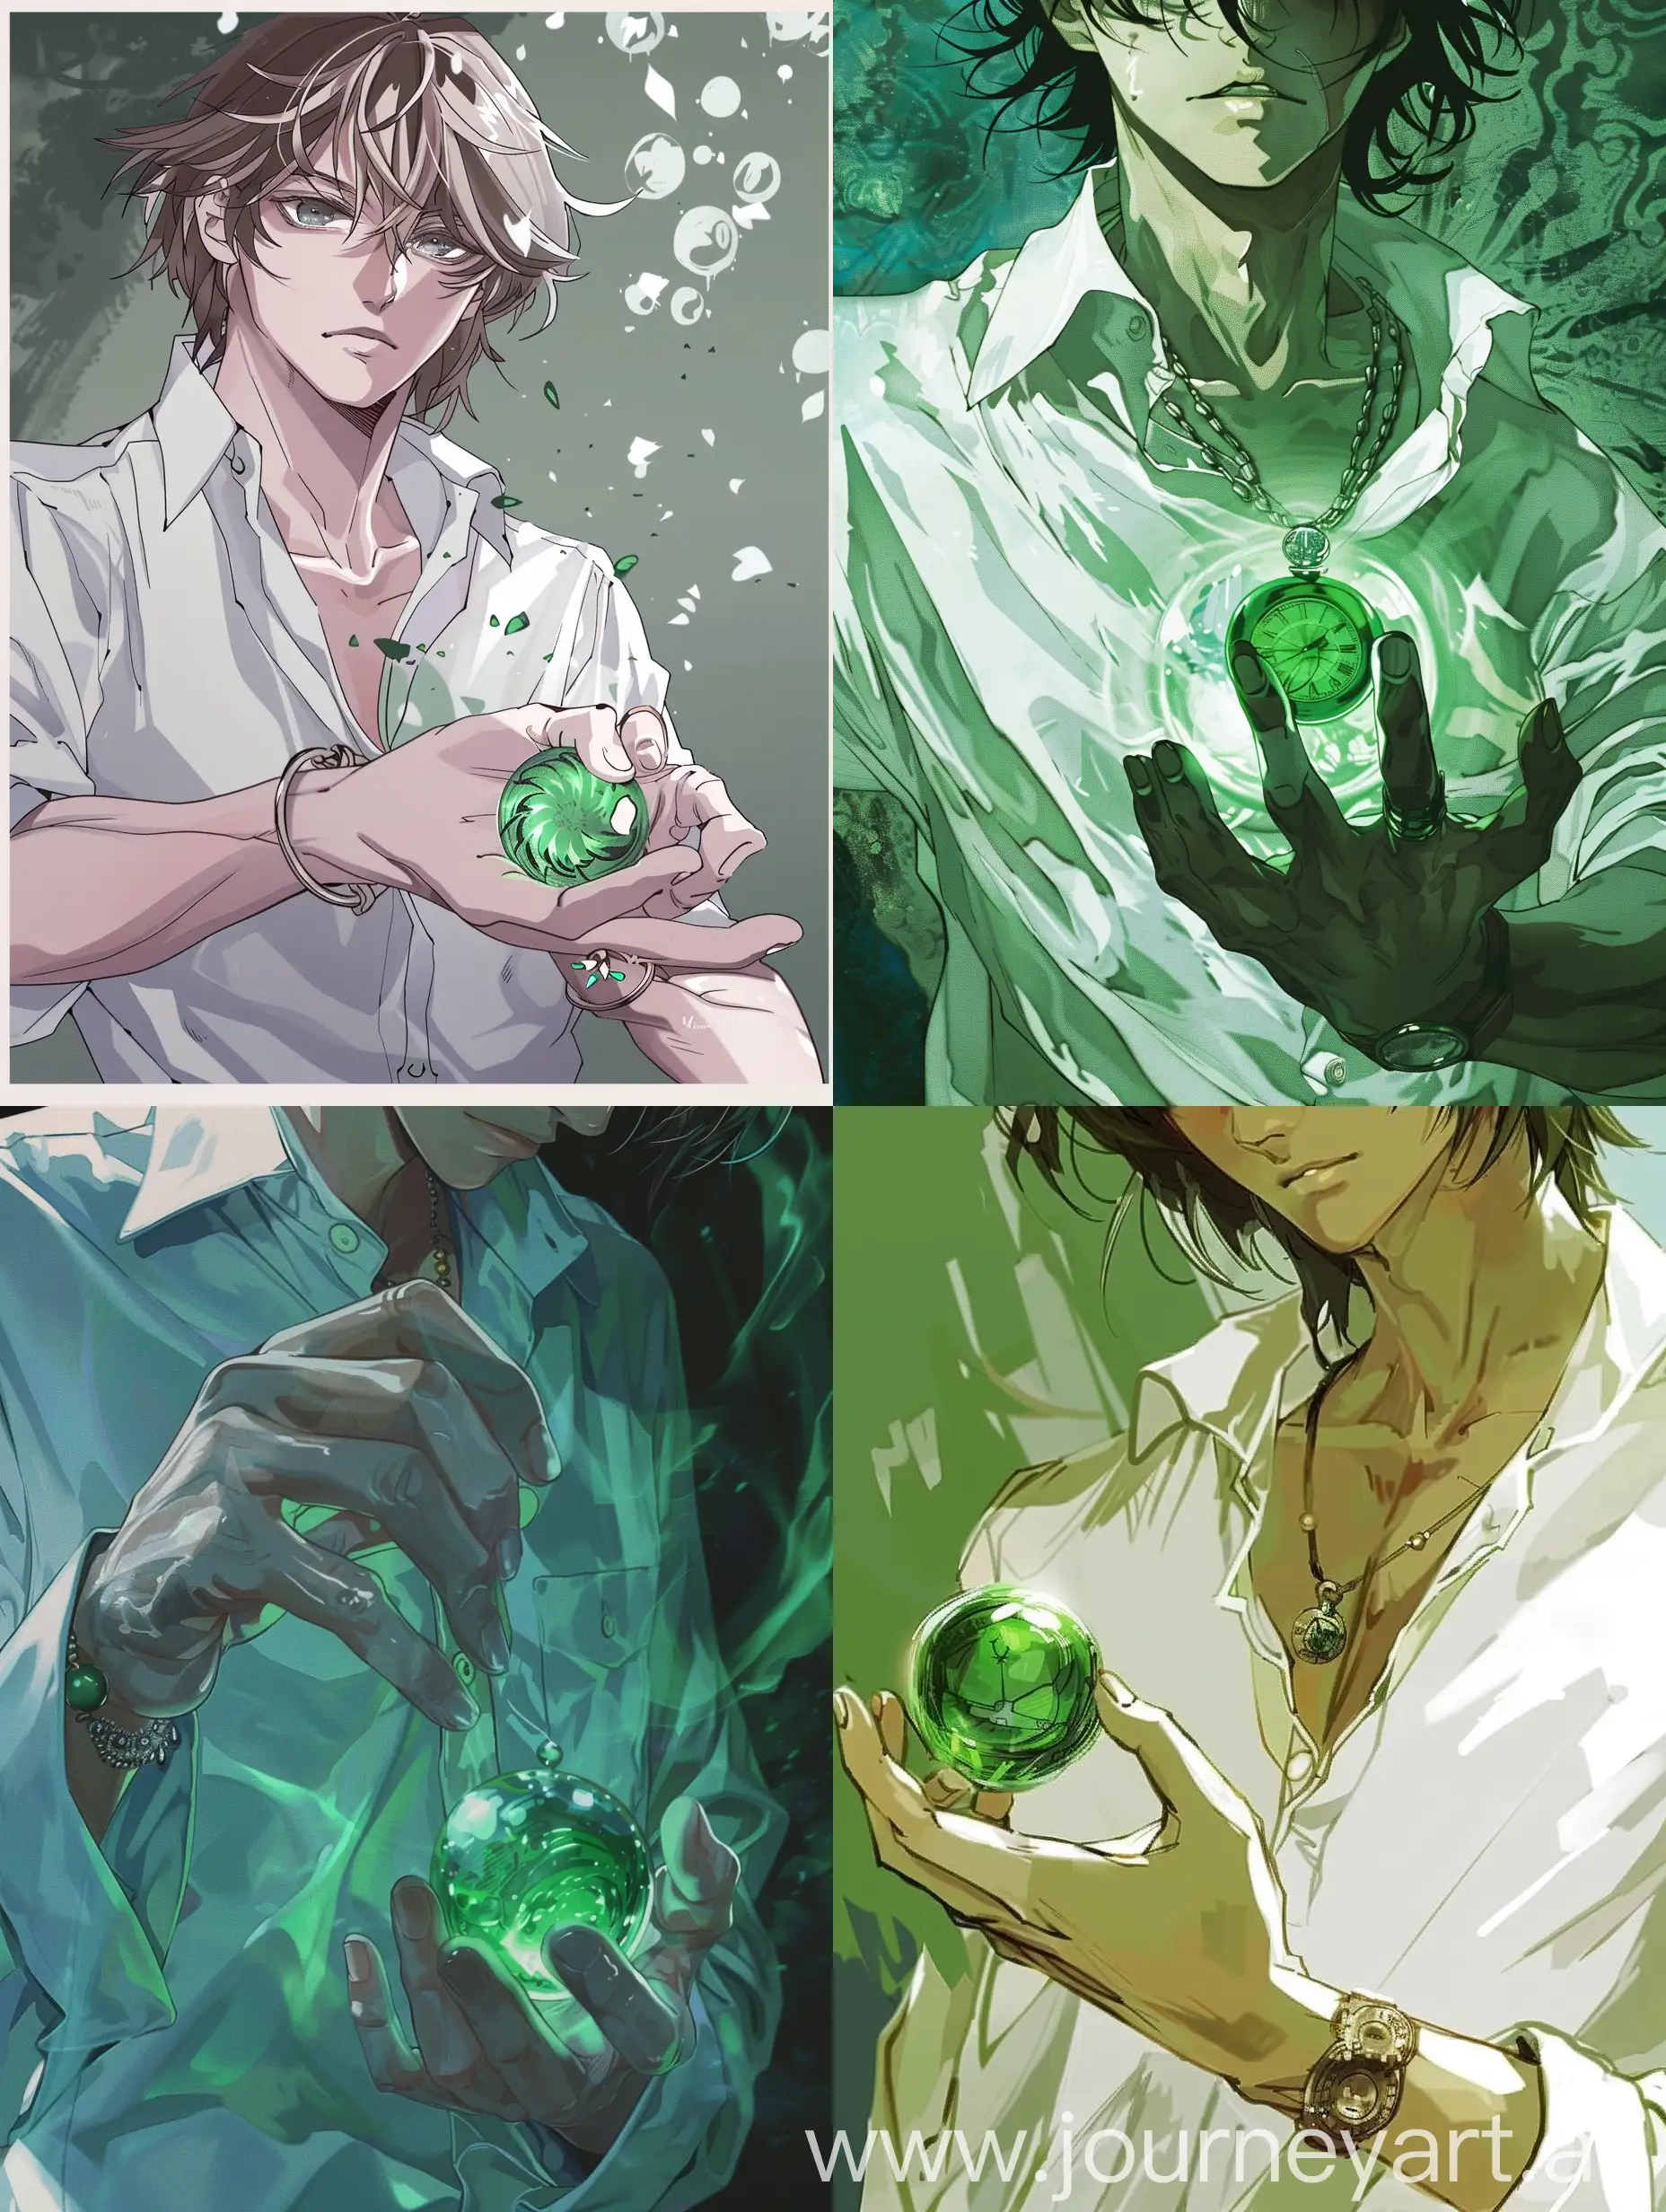 The green time amulet in the guy's hand, the guy's wearing a white shirt, manga style.